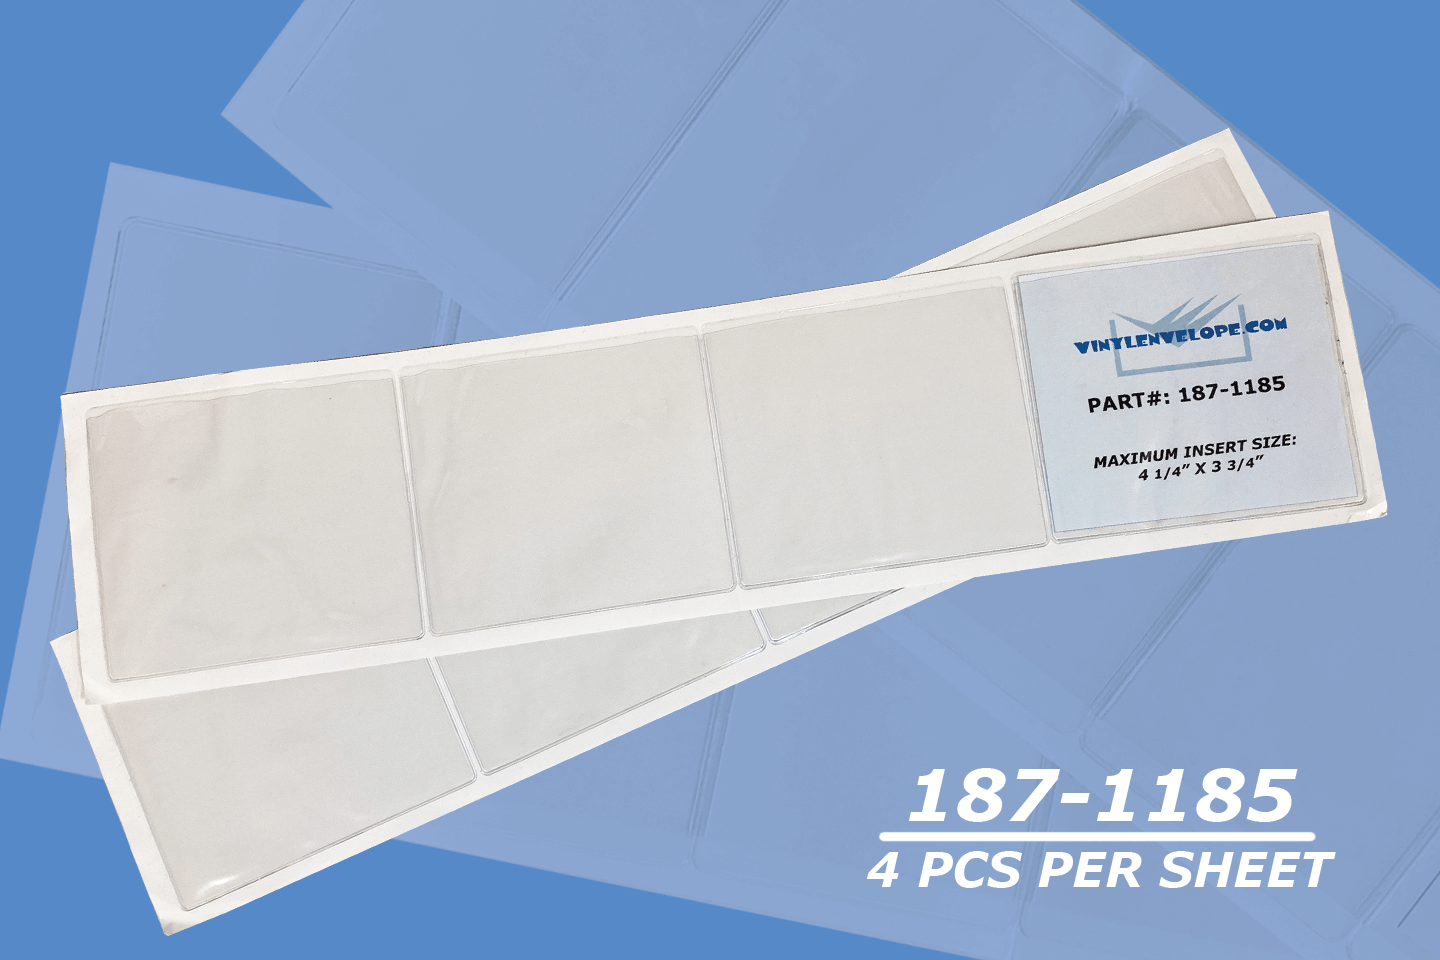 4 1/4" X 3 3/4" Removable Adhesive Pouch